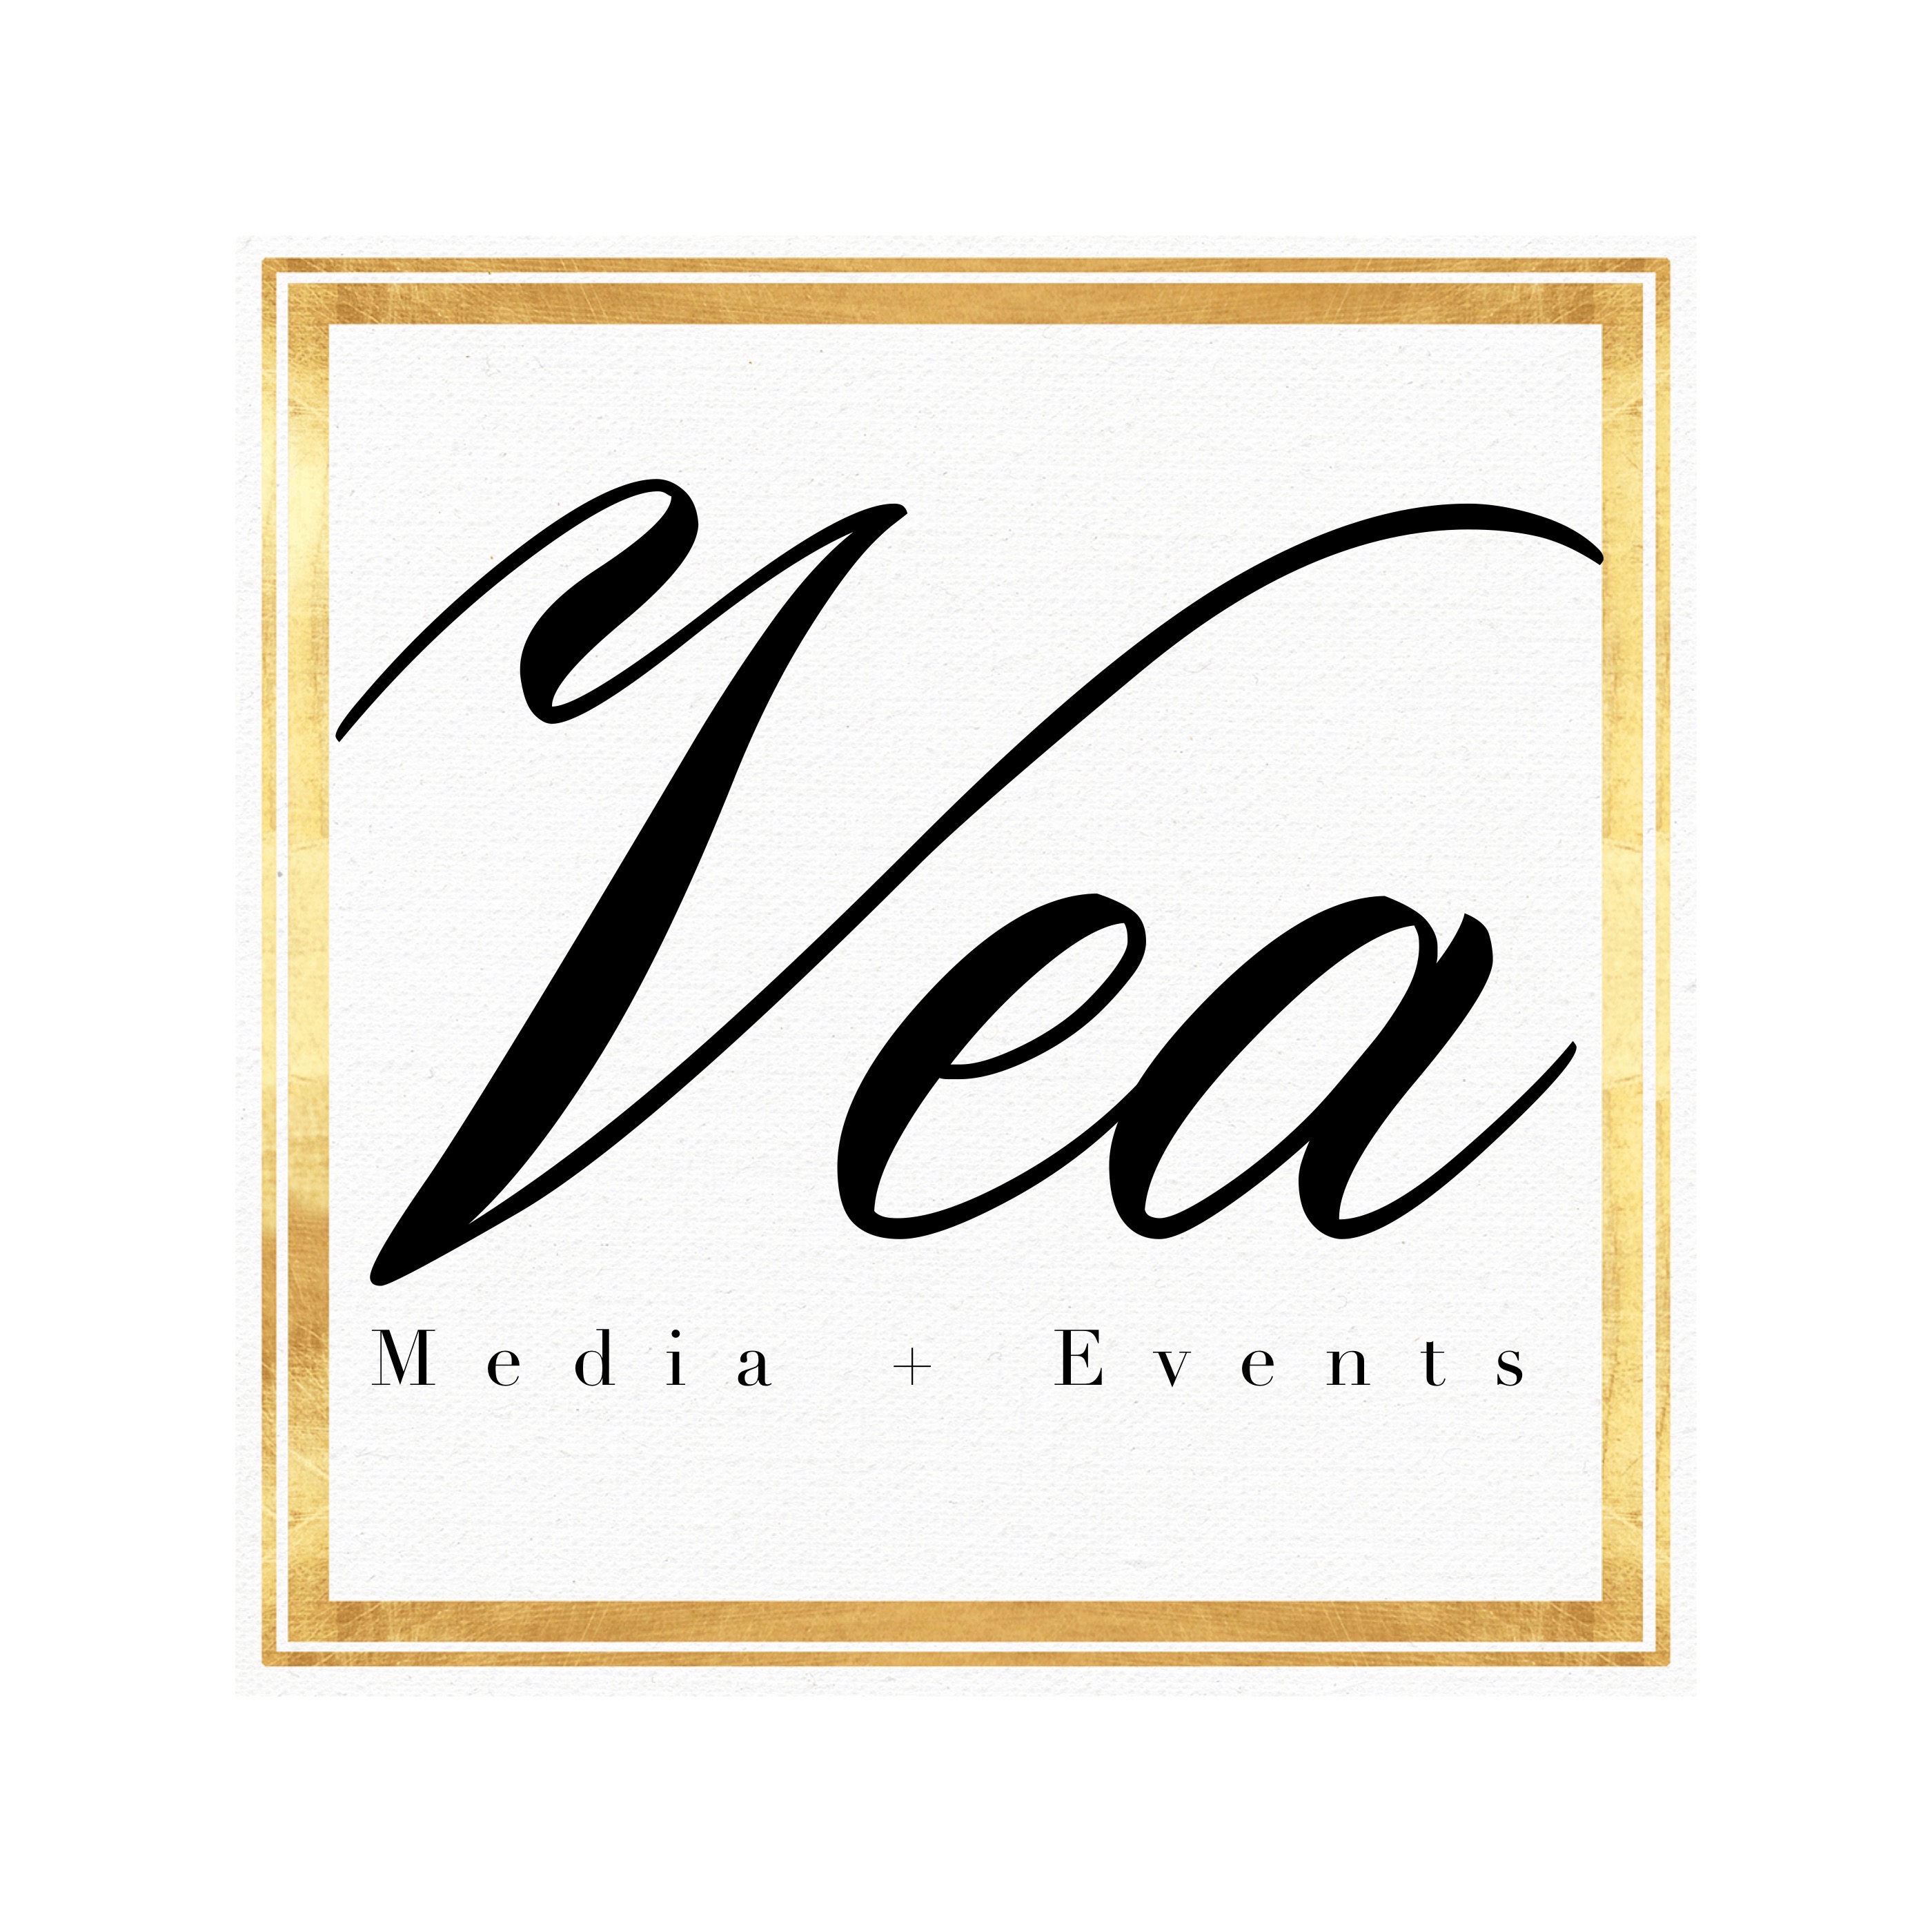 Vea Media and Events